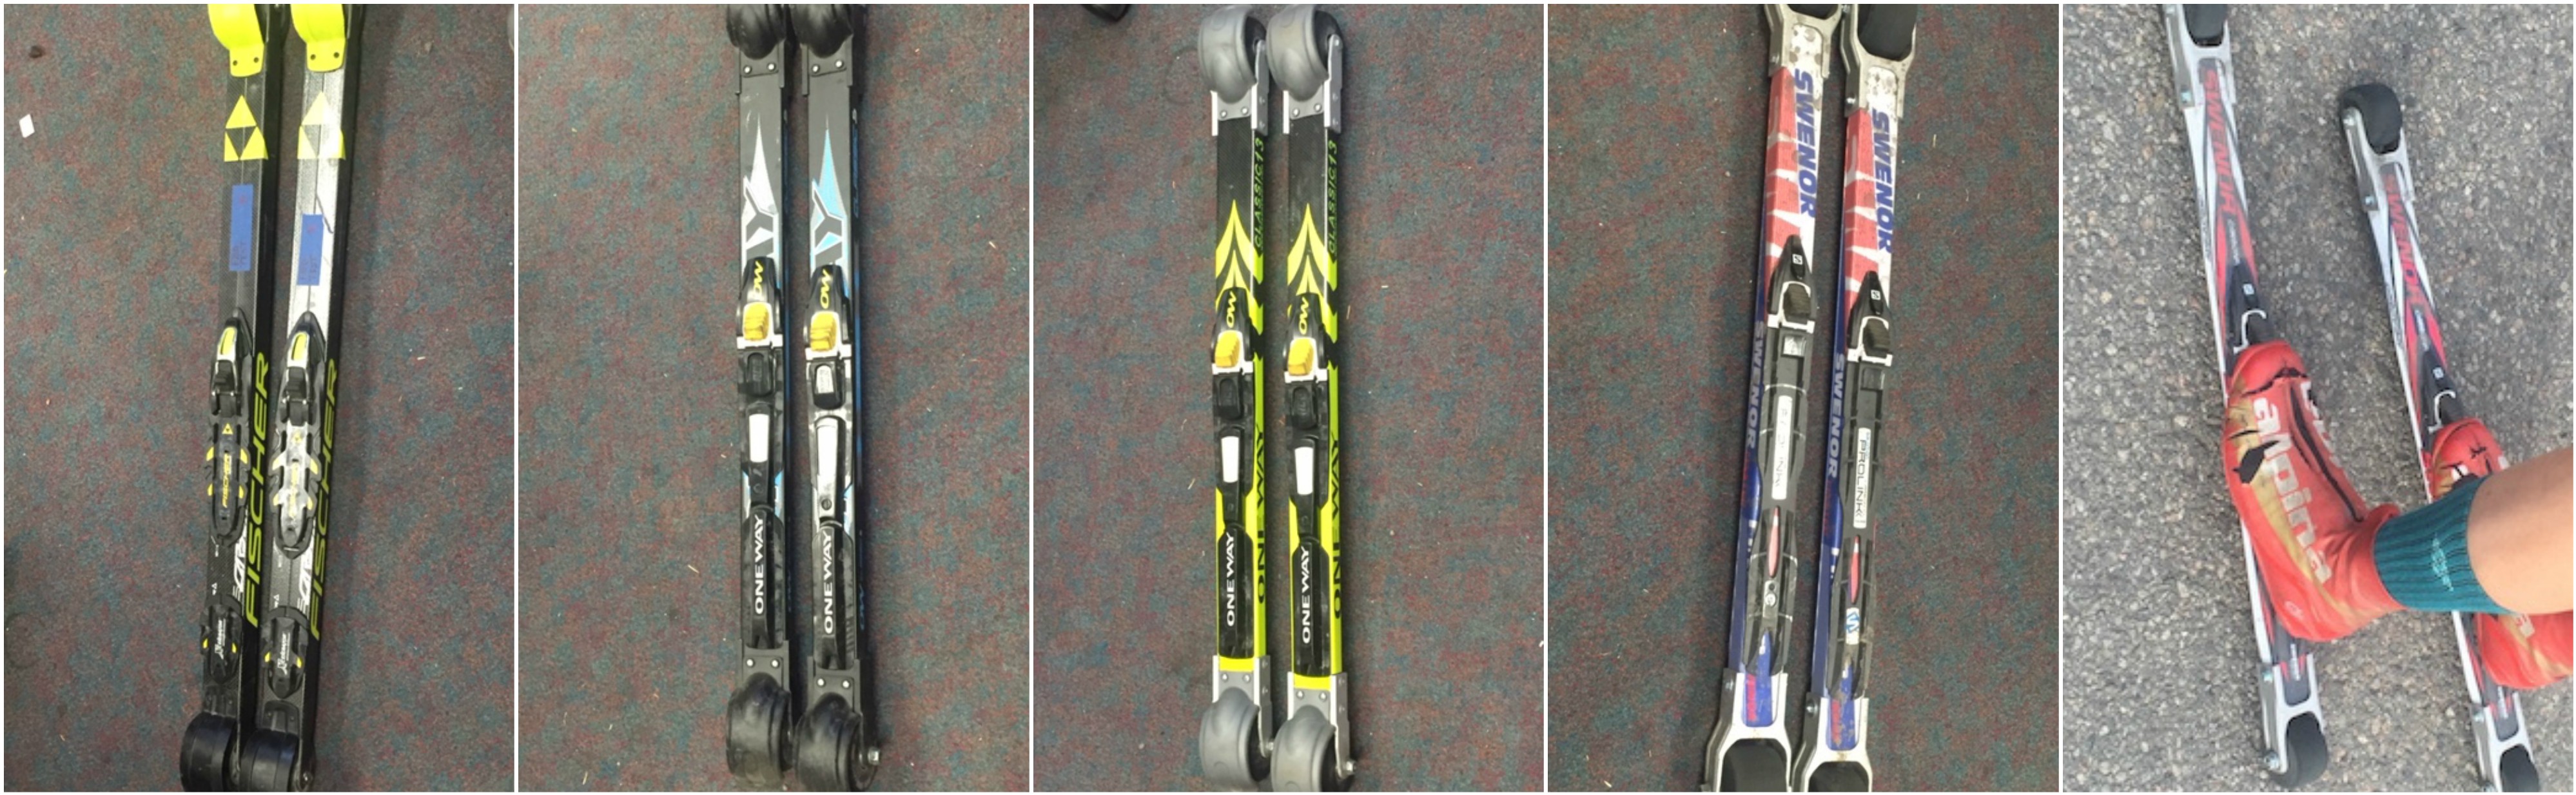 A five-way tie for third place in the 2016 classic rollerski review: (from left to right): Fischer Carbonlite, OneWay Classic 5, OneWay Classic 13, Swenor Finstep, and Swenor Carbonfibre 